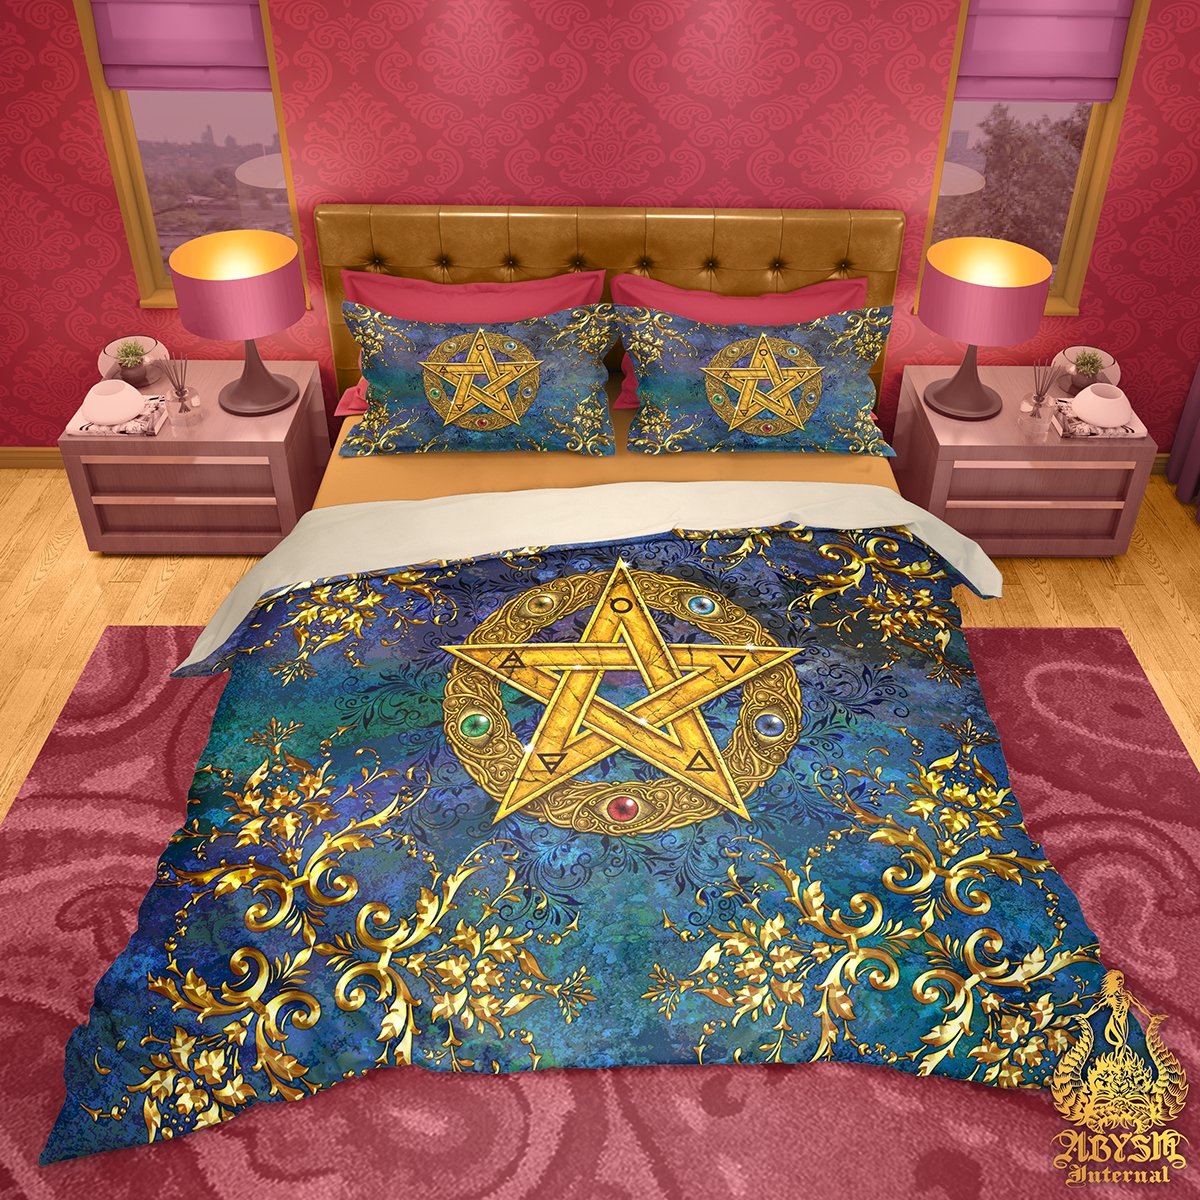 Wicca Bedding Set, Comforter and Duvet, Pagan Bed Cover and Witchy Bedroom Decor, King, Queen and Twin Size - Gold Pentacle - Abysm Internal